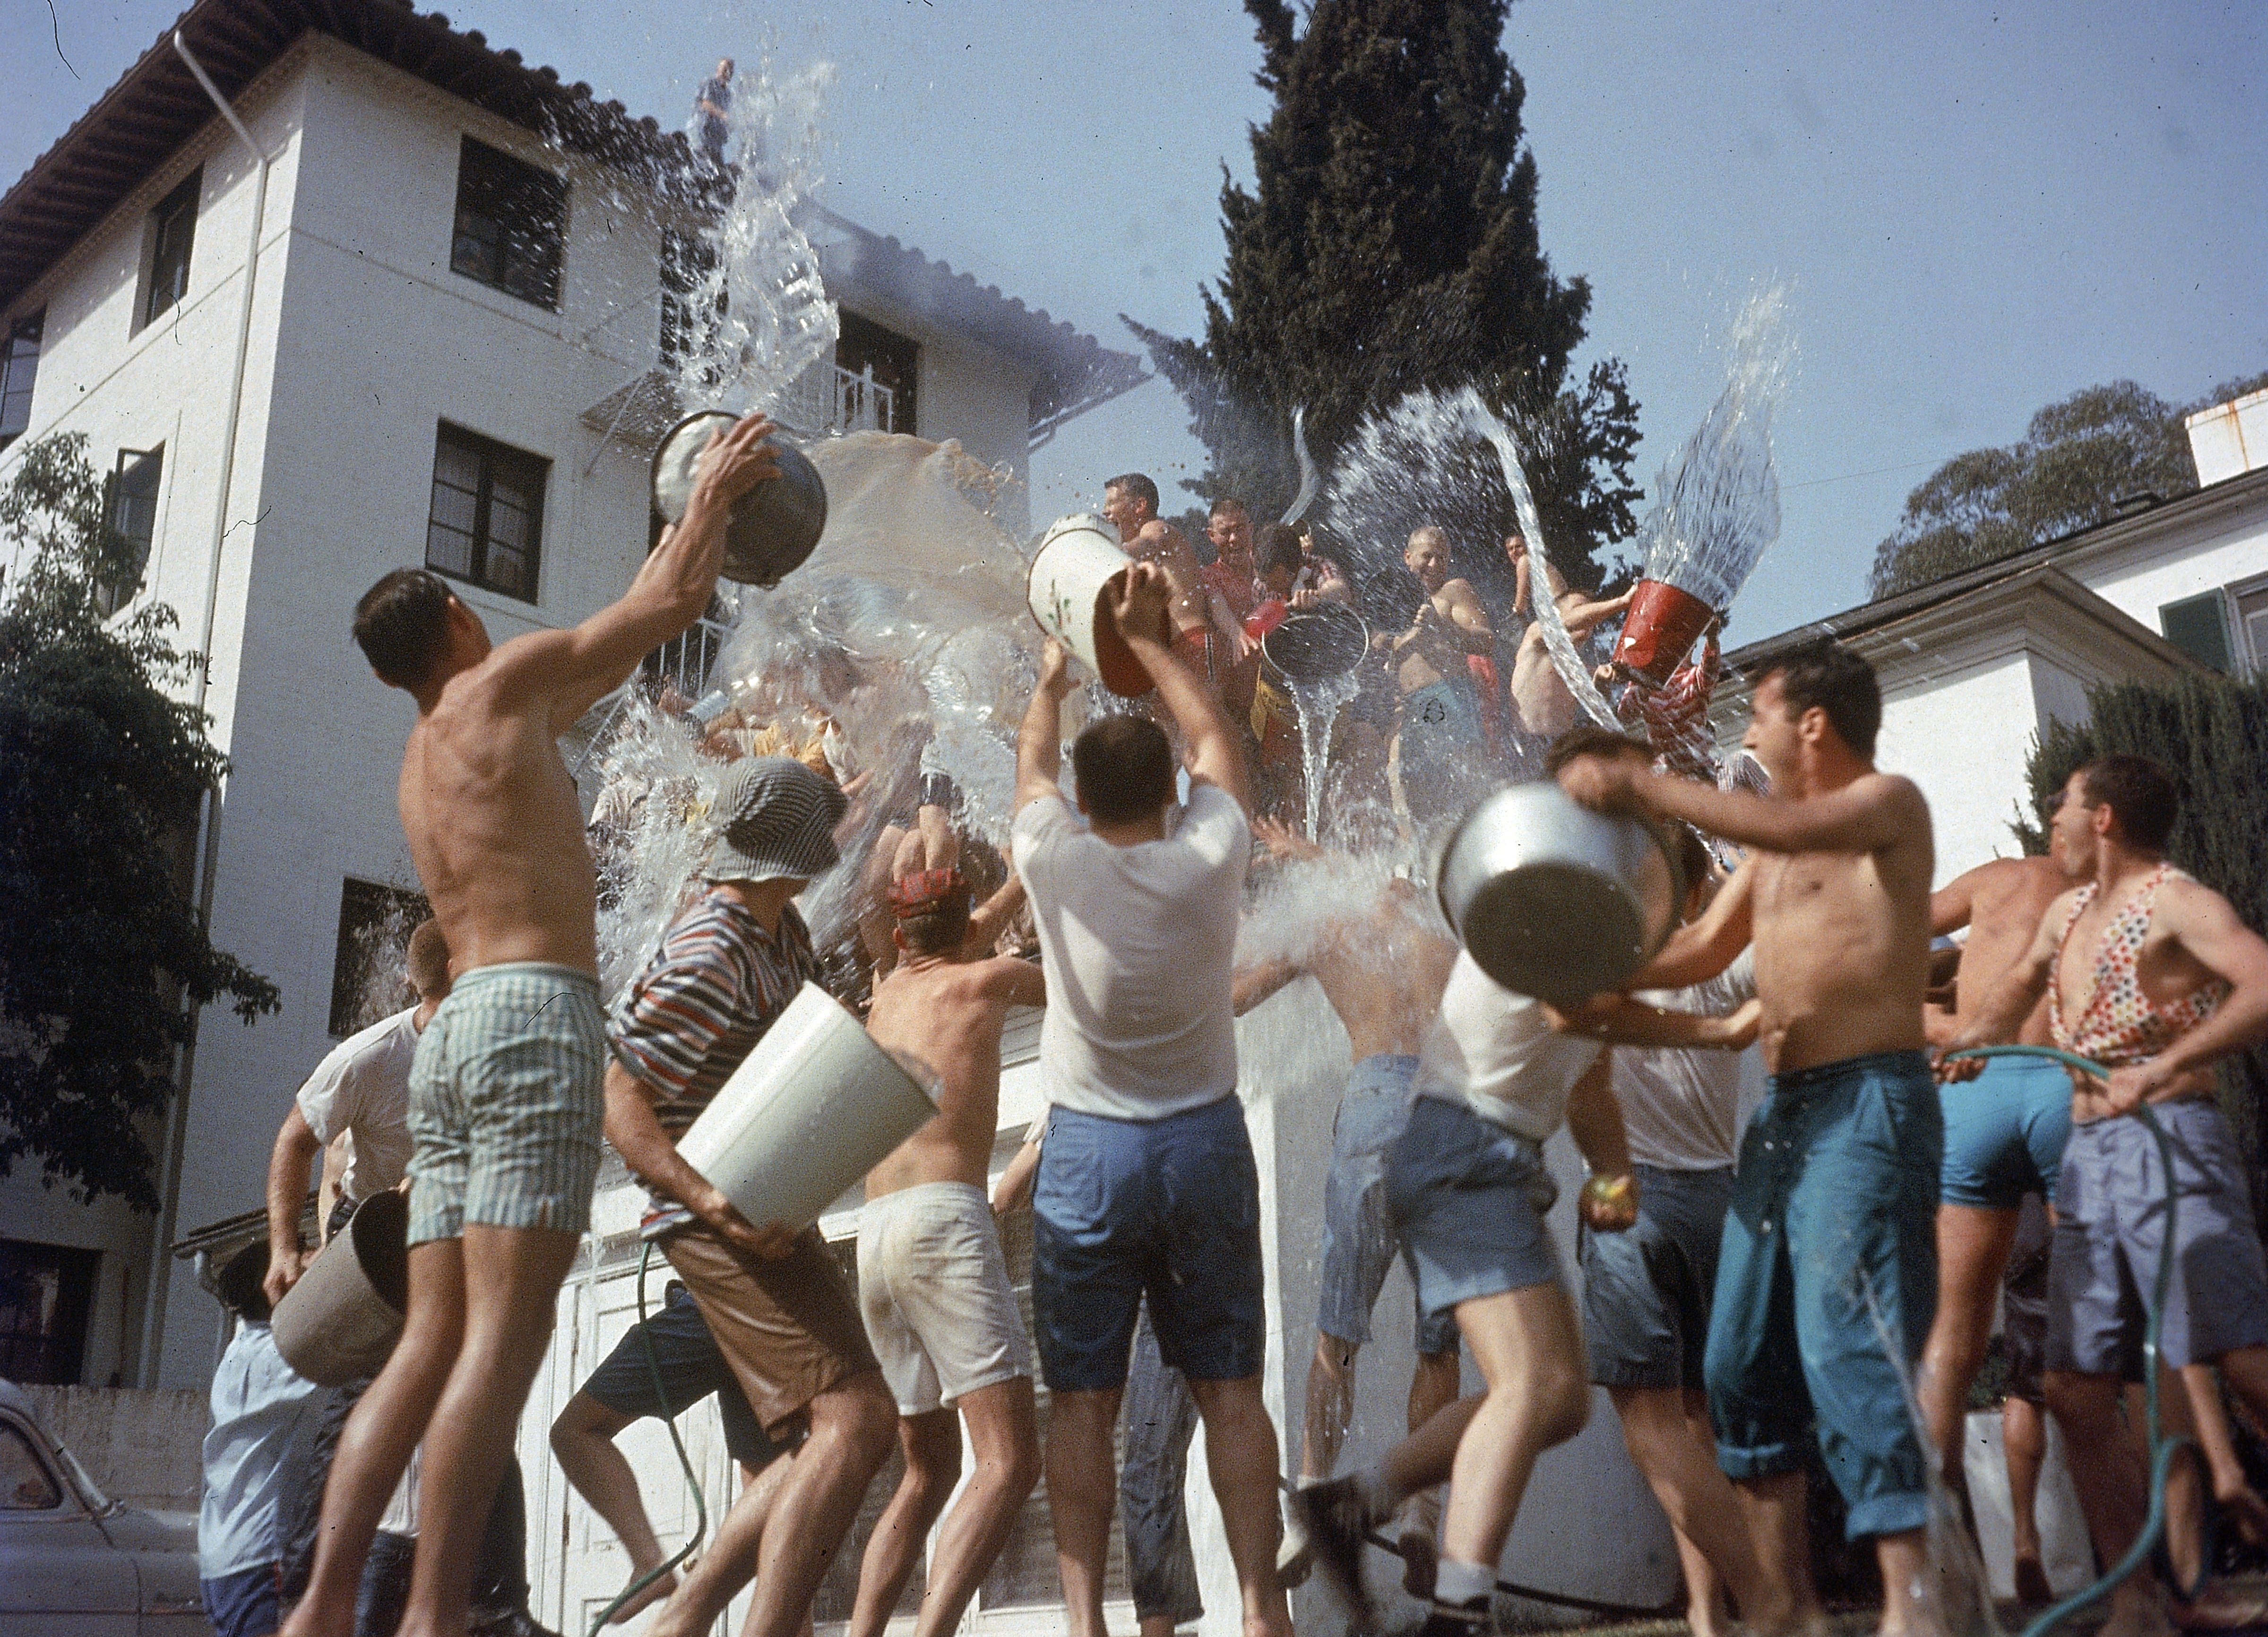 The Sigma Pi and Phi Kappa Sigma fraternities have a waterfight on the UCLA campus in Los Angeles. (Gene Lester—Getty Images)